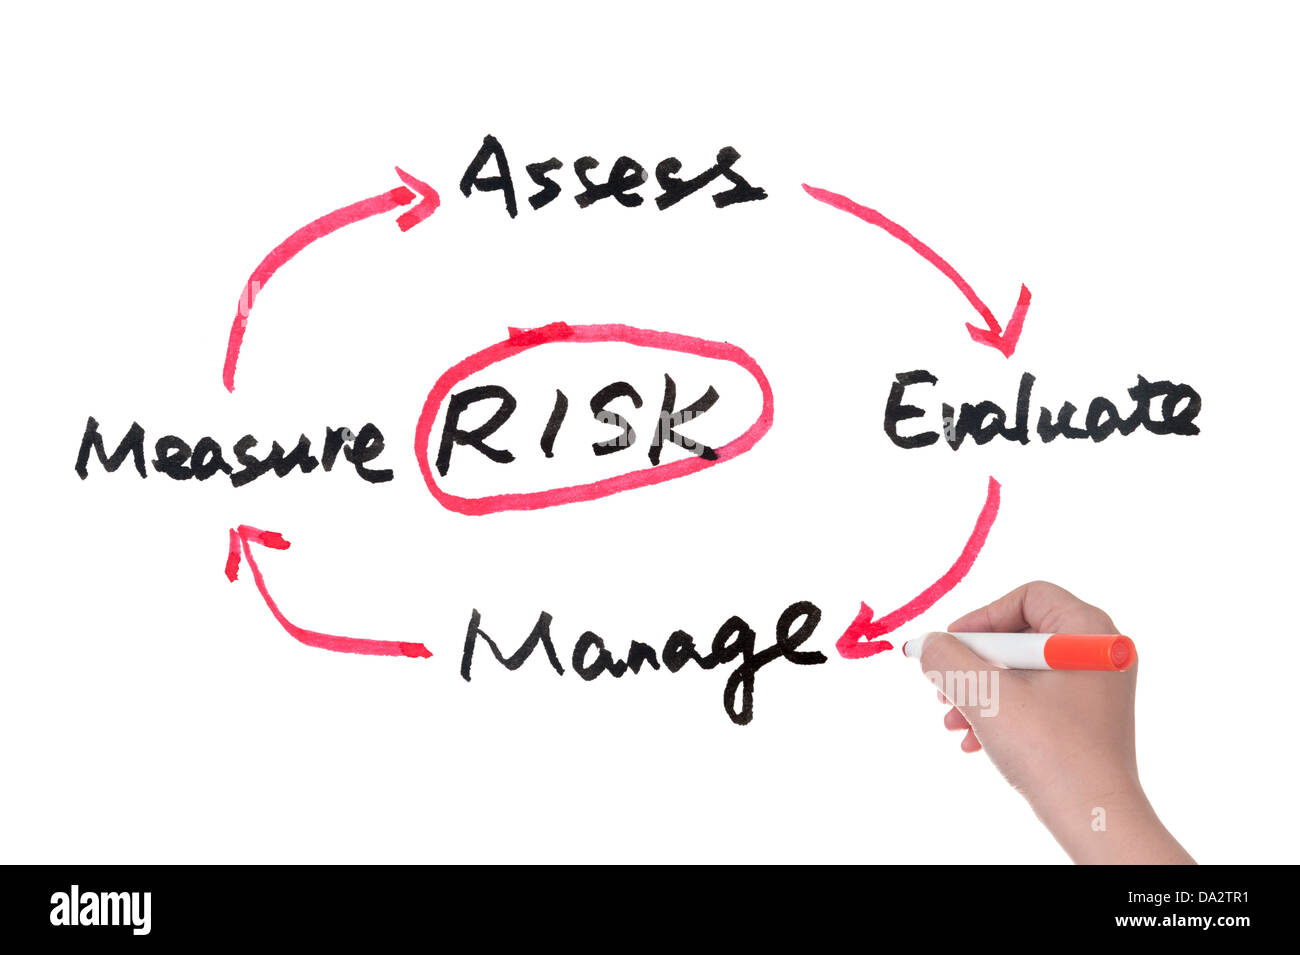 Risk management concept diagram drawn on white board Stock Photo